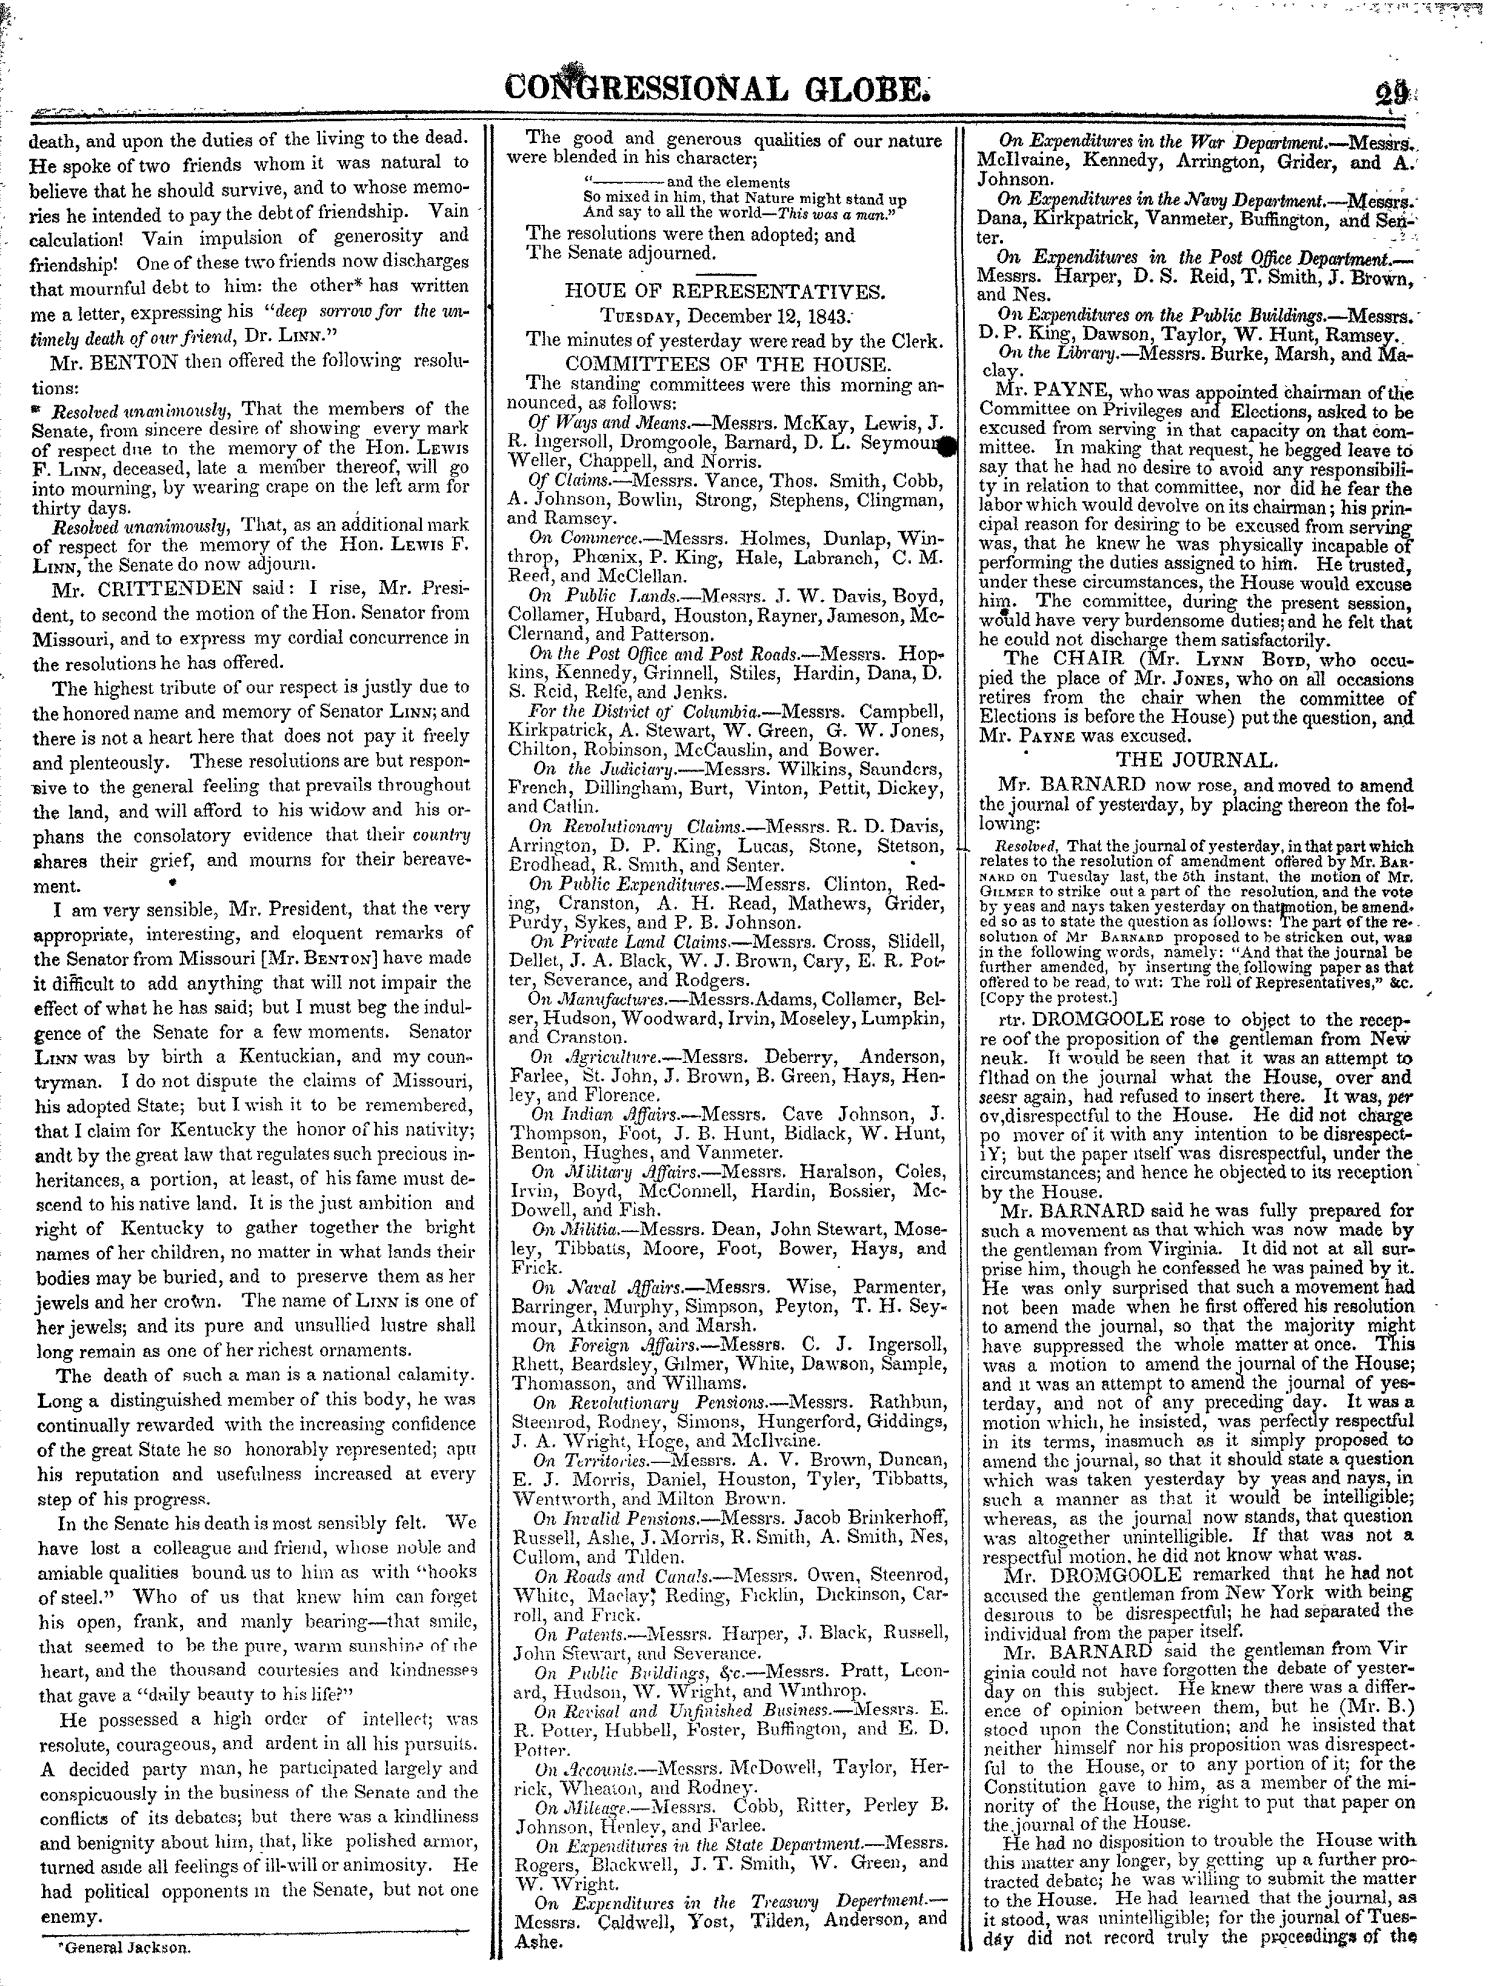 The Congressional Globe, Volume 13, Part 1: Twenty-Eighth Congress, First Session
                                                
                                                    29
                                                